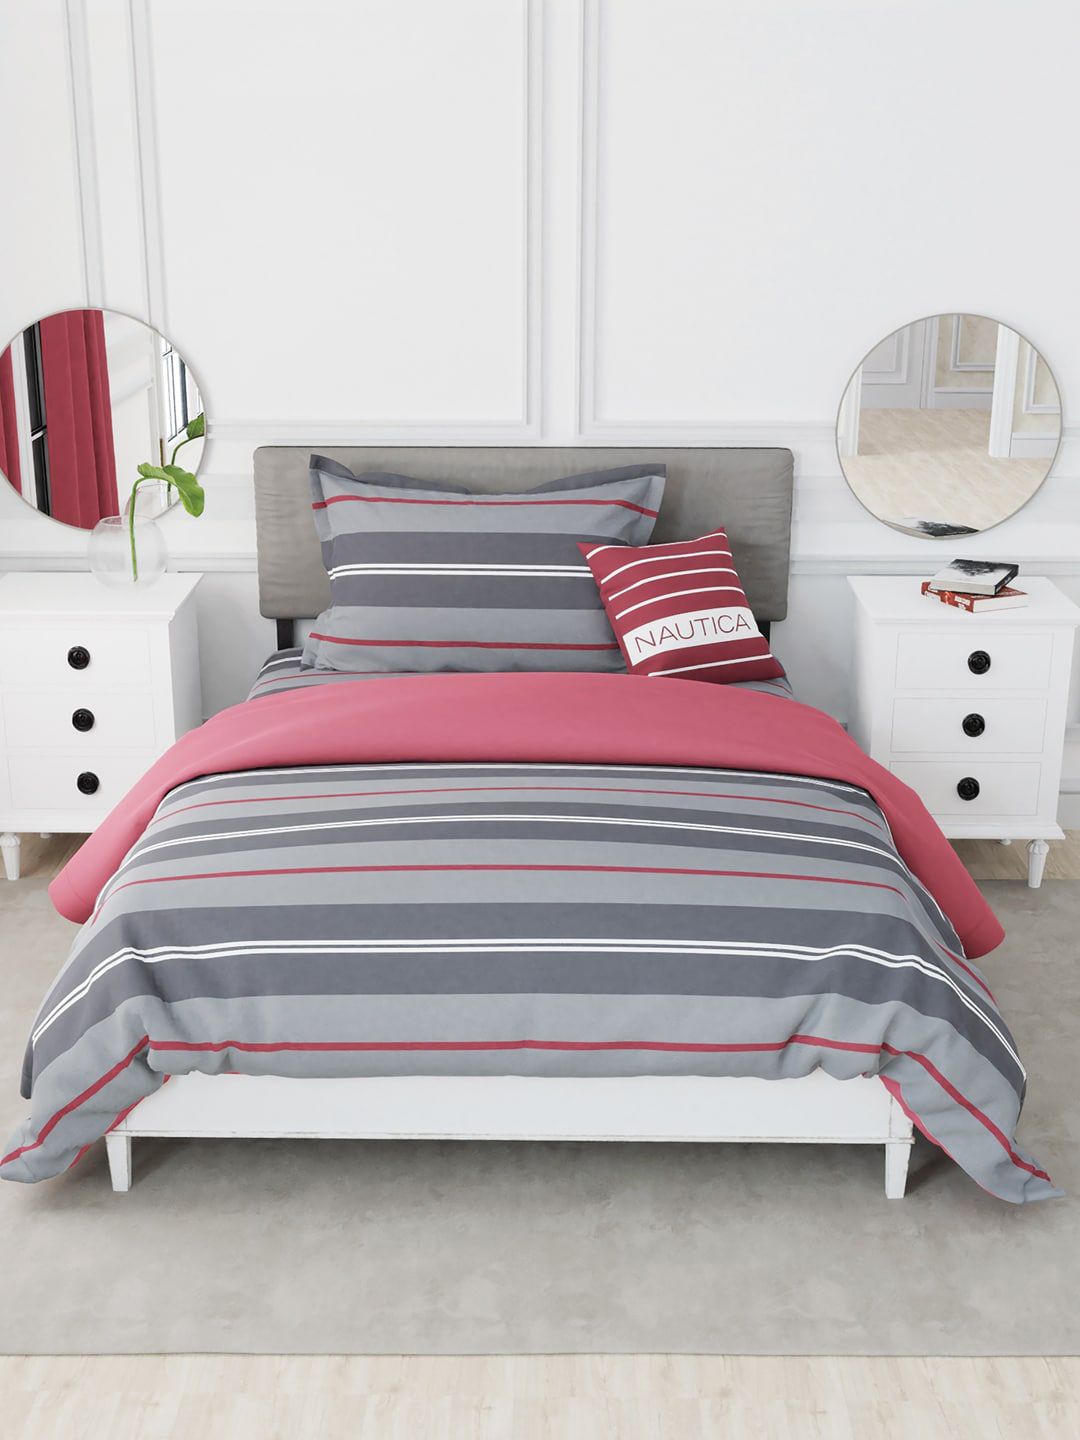 NauticA Grey Striped Blankets 100% Satin Cotton Comforter For All Weather Price in India